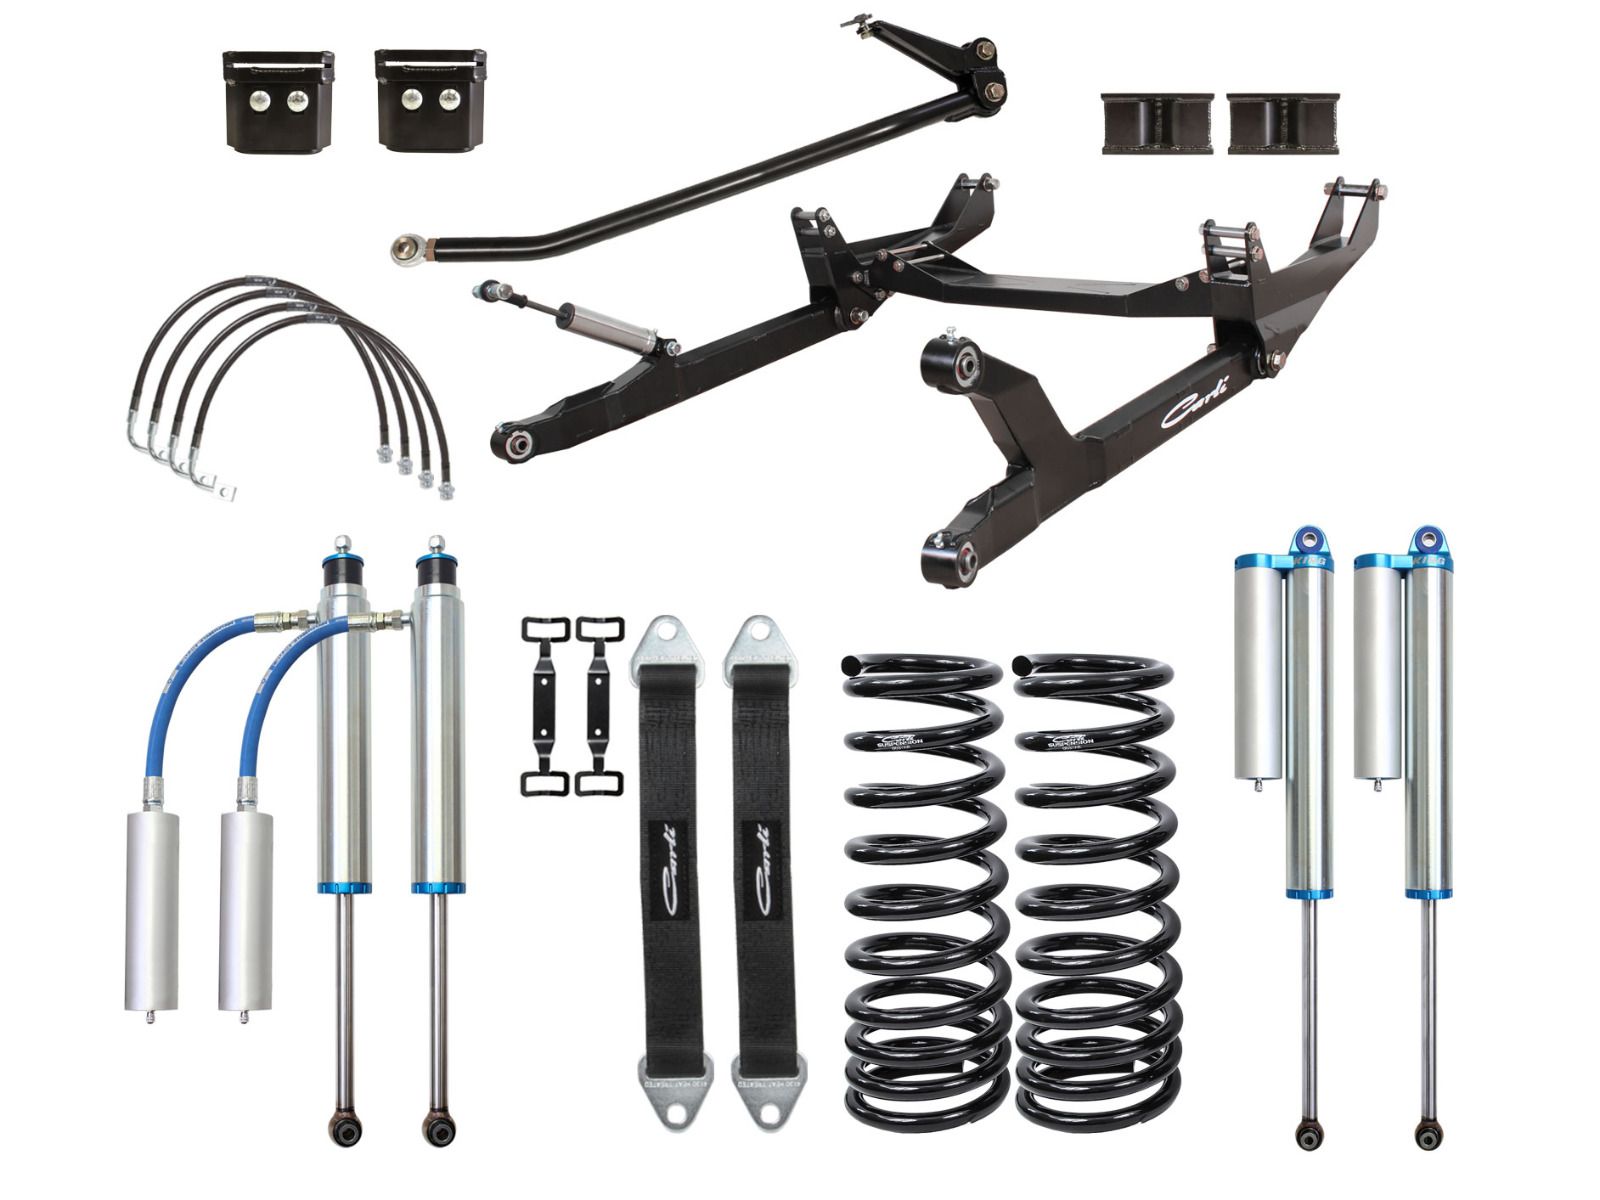 6" 2012 Dodge Ram 3500 4wd (w/Diesel Engine) Pintop Lift System by Carli Suspension